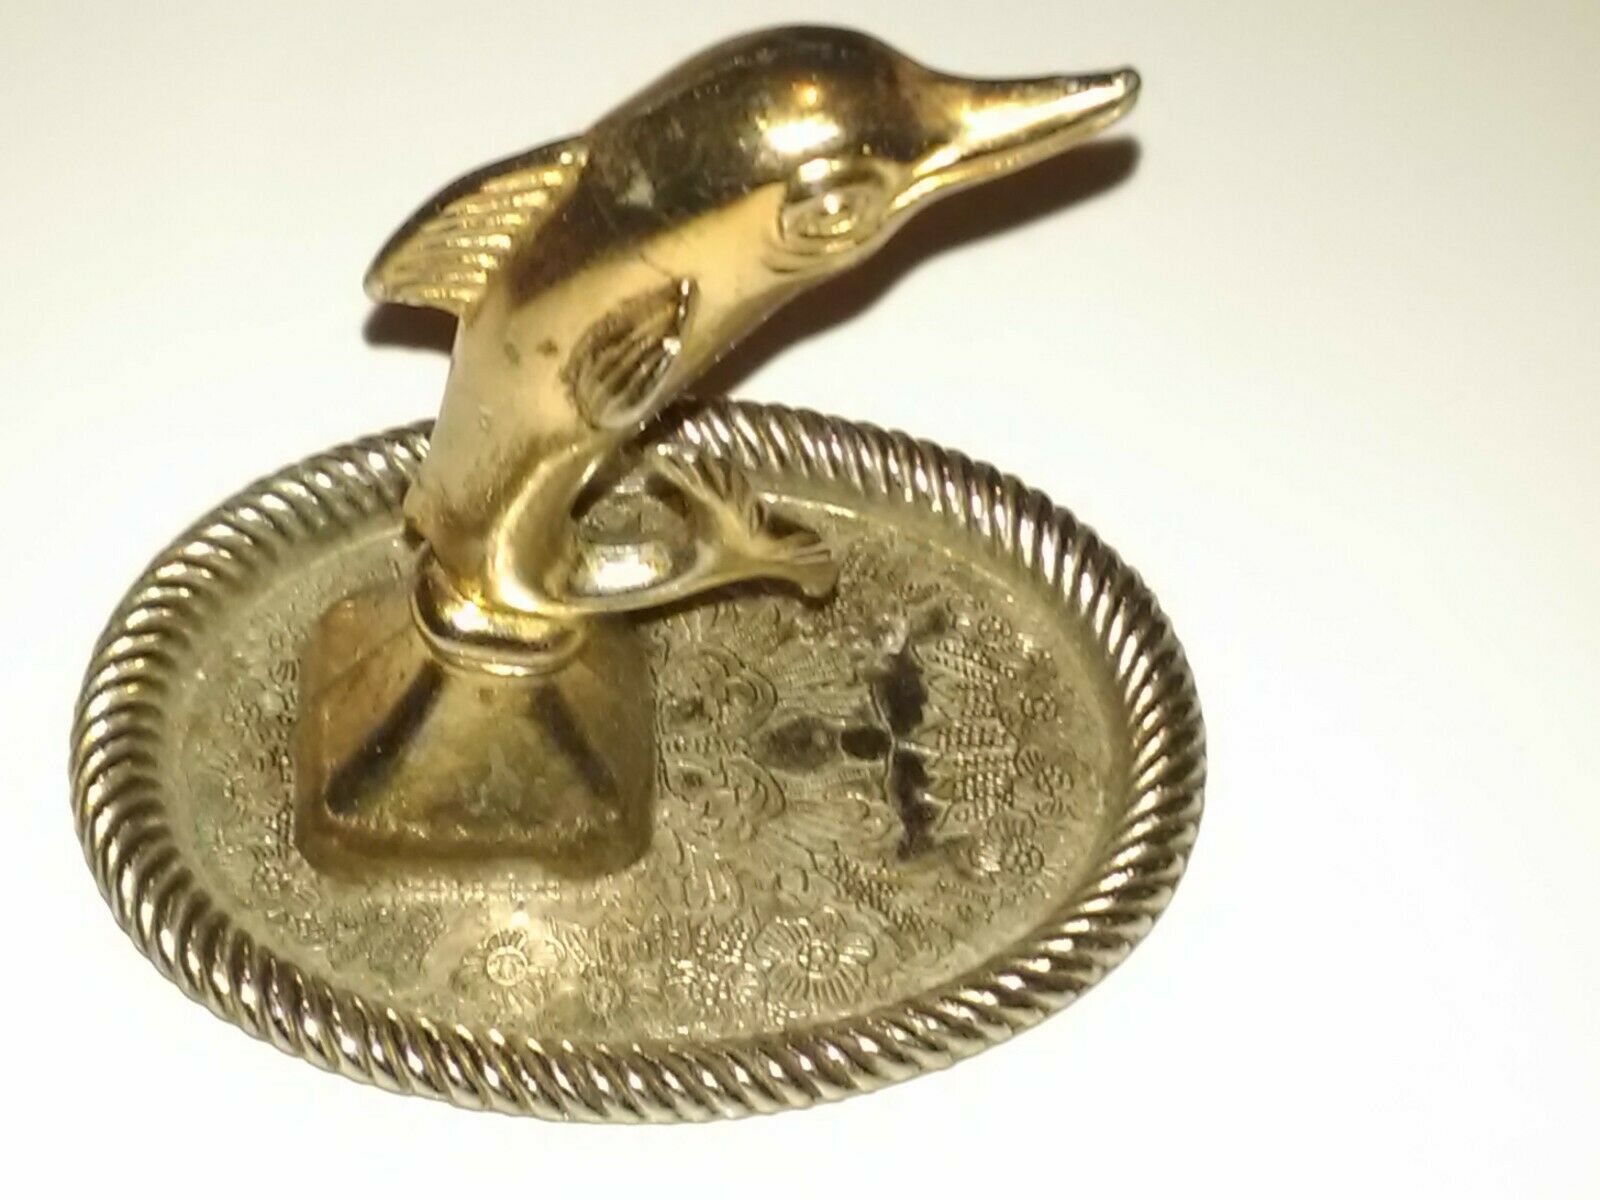 Vintage Silverplated Dolphin On A Tray Ring Holder